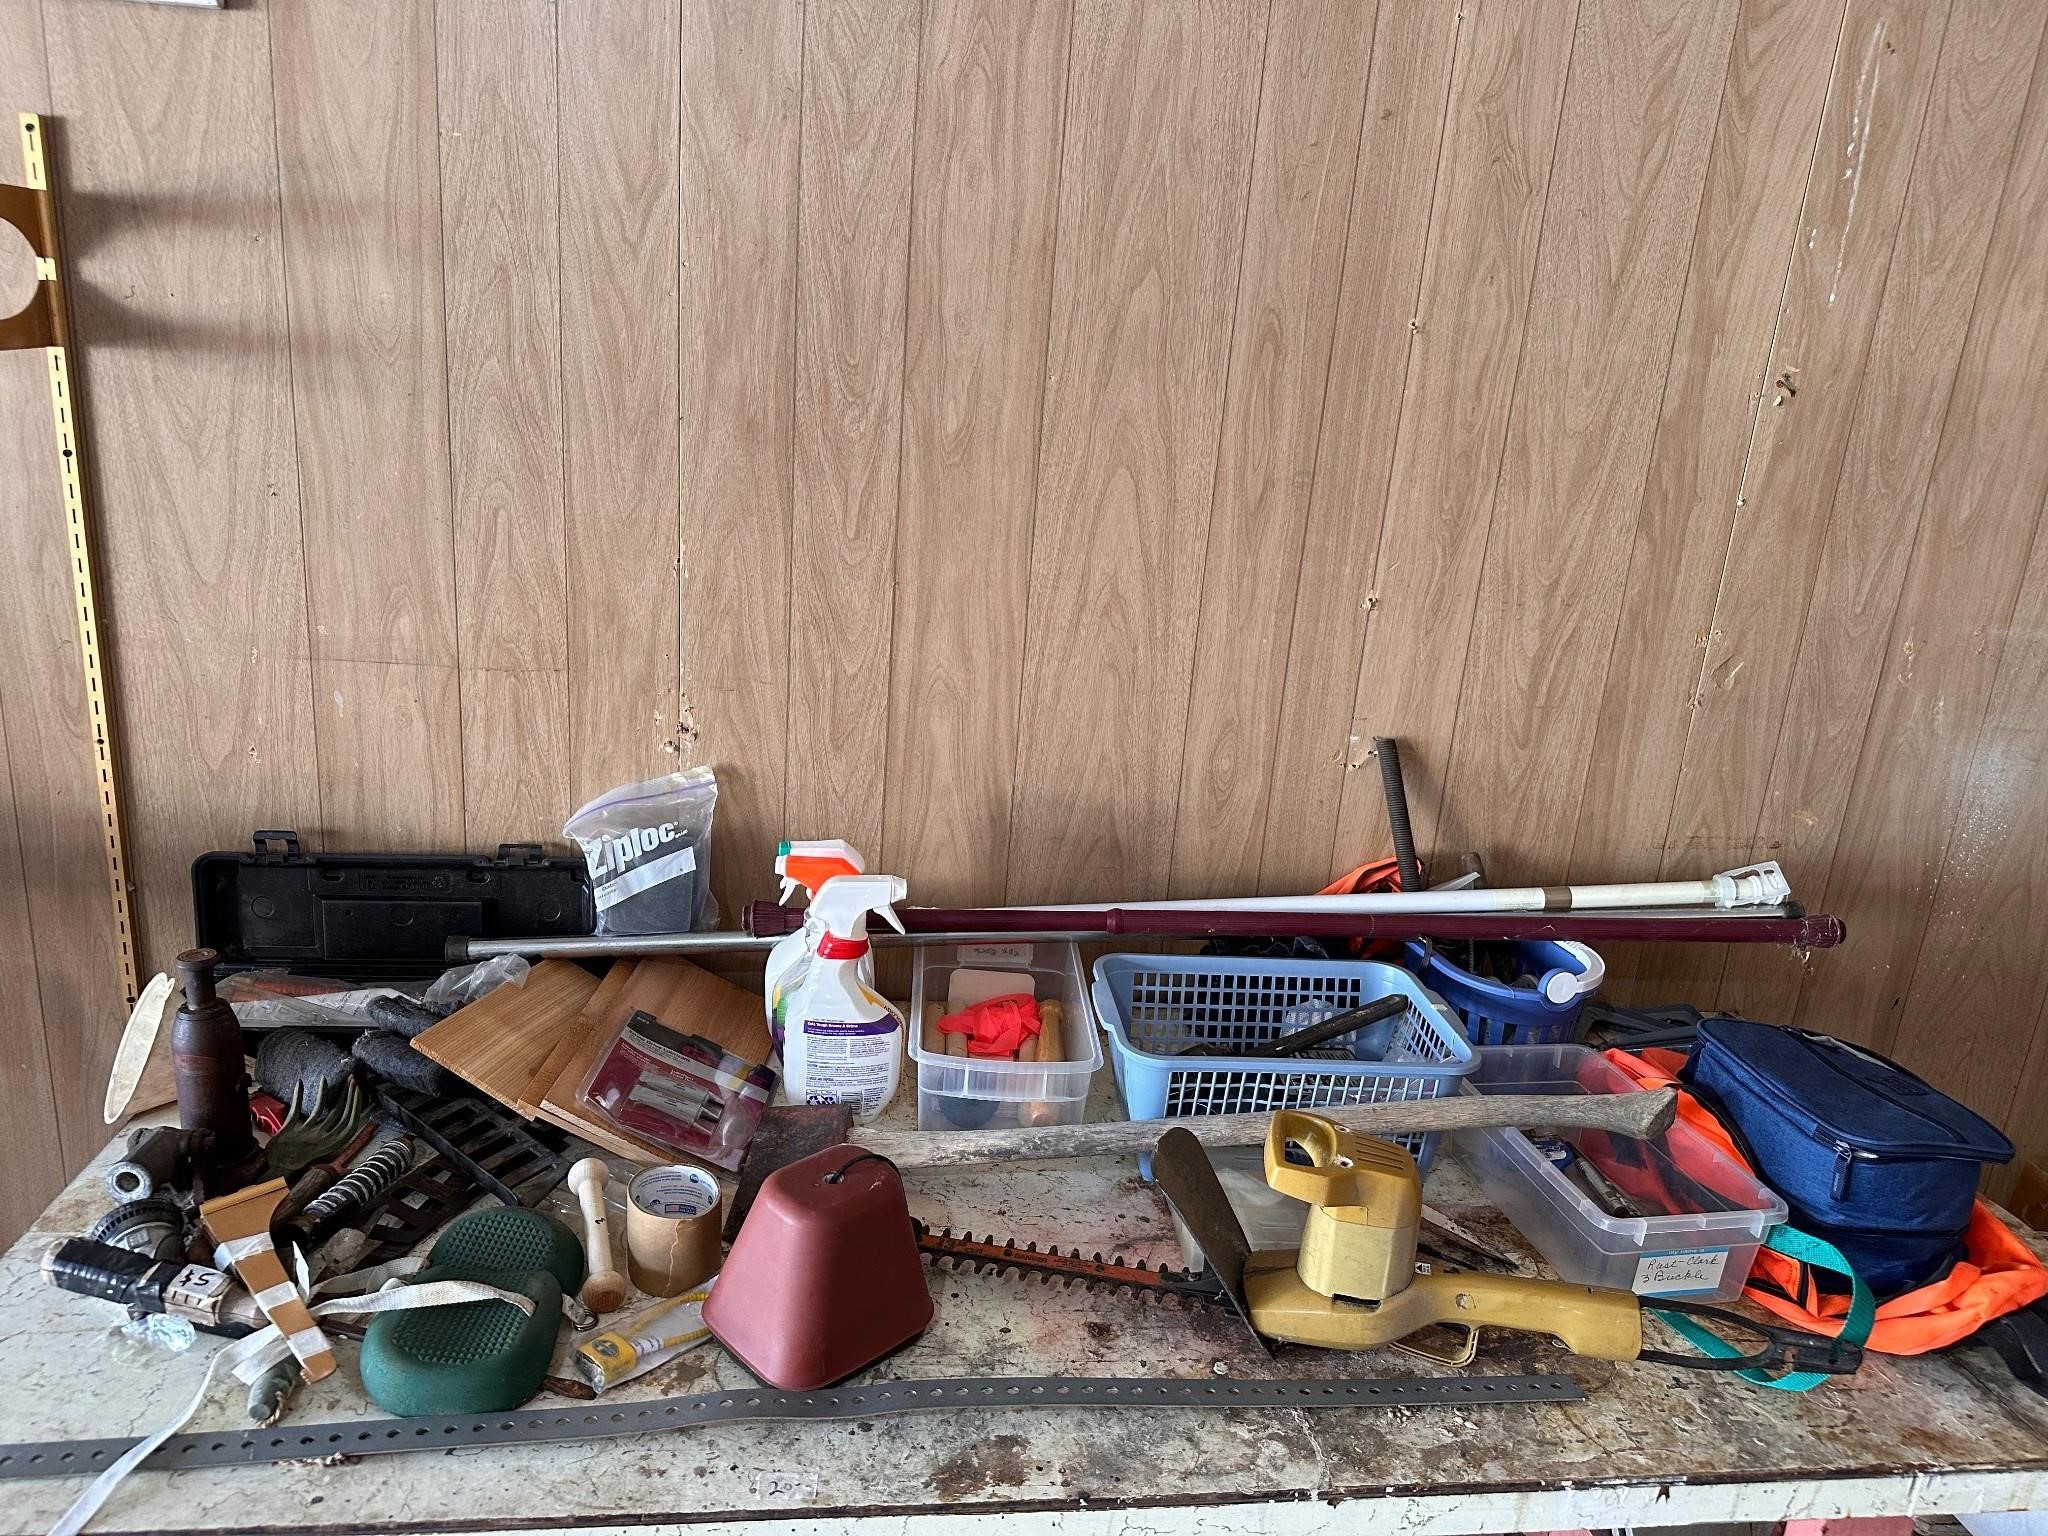 Table full of various tools and items